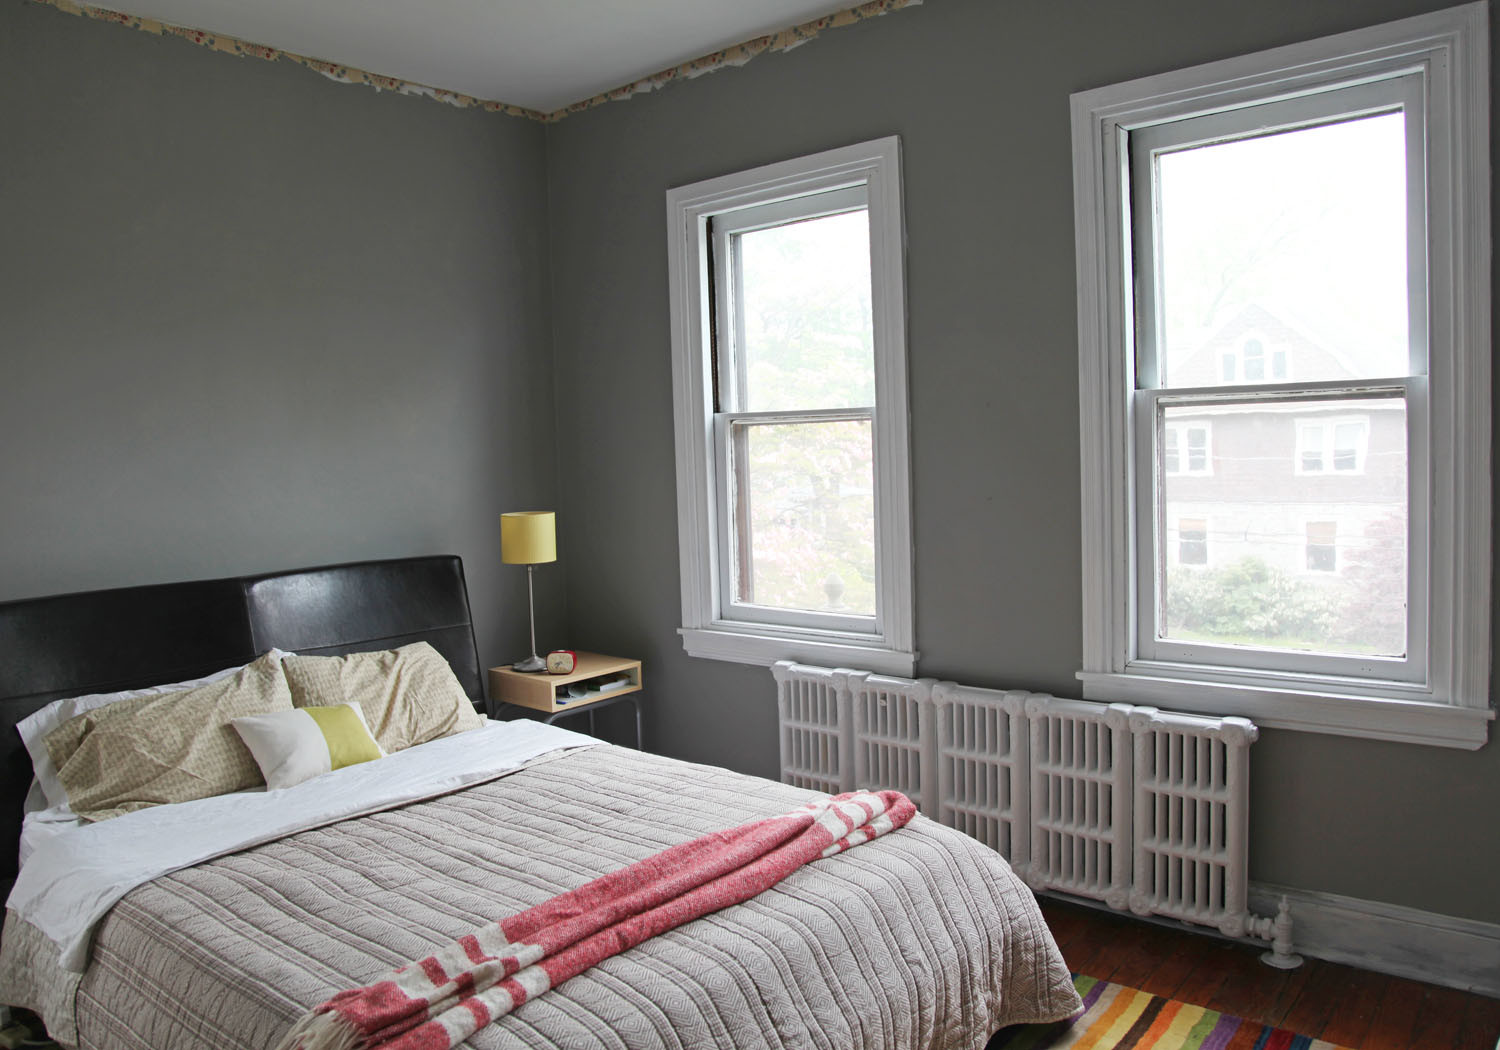 Bedroom Gray Walls
 Master Bedroom New Gray Wall Color & White Trim